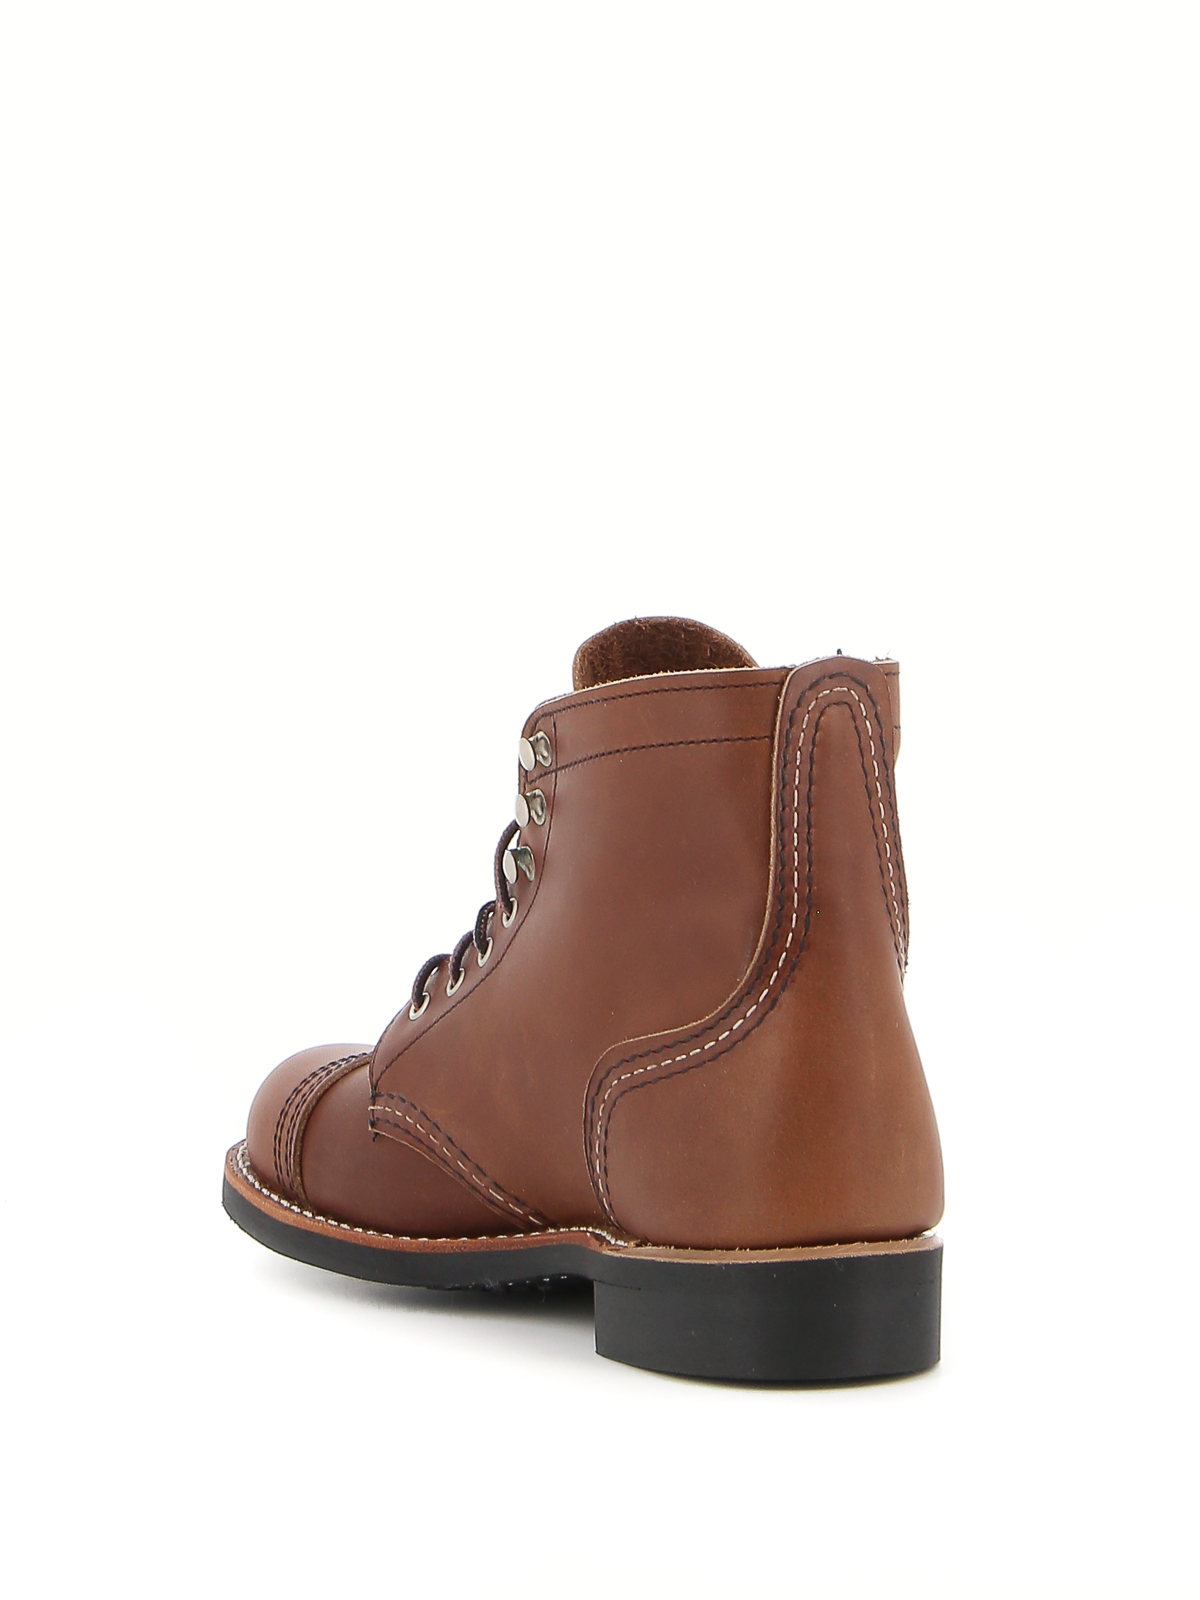 iron ranger red wing sale